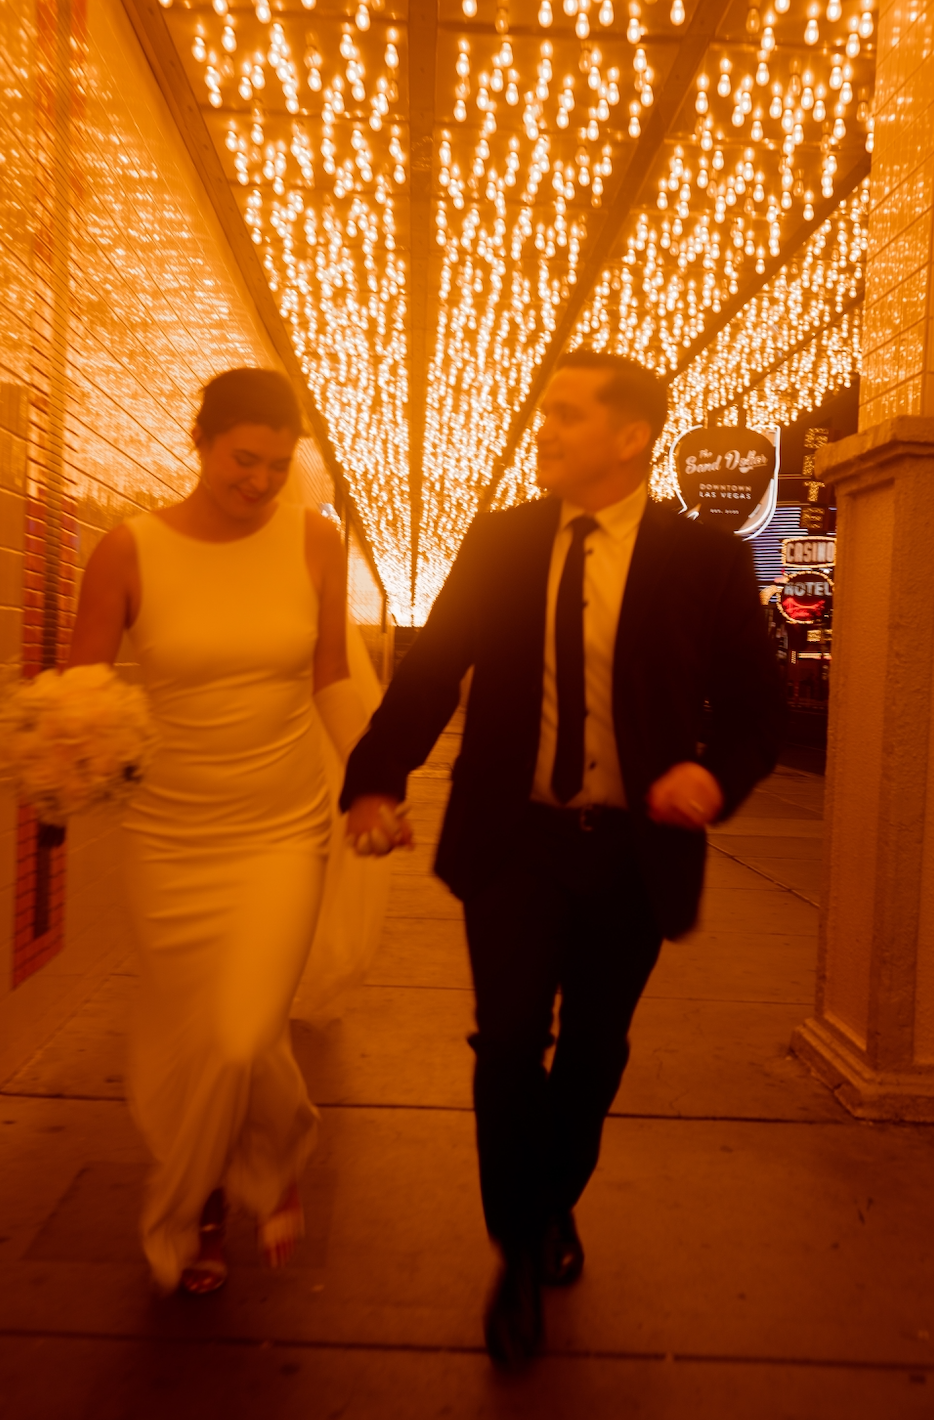 Downtown Las Vegas newlywed couple, running through DTLV with glittery lights in the background. The bride is wearing a perfectly altered gown and the groom a perfectly tailored black suit.